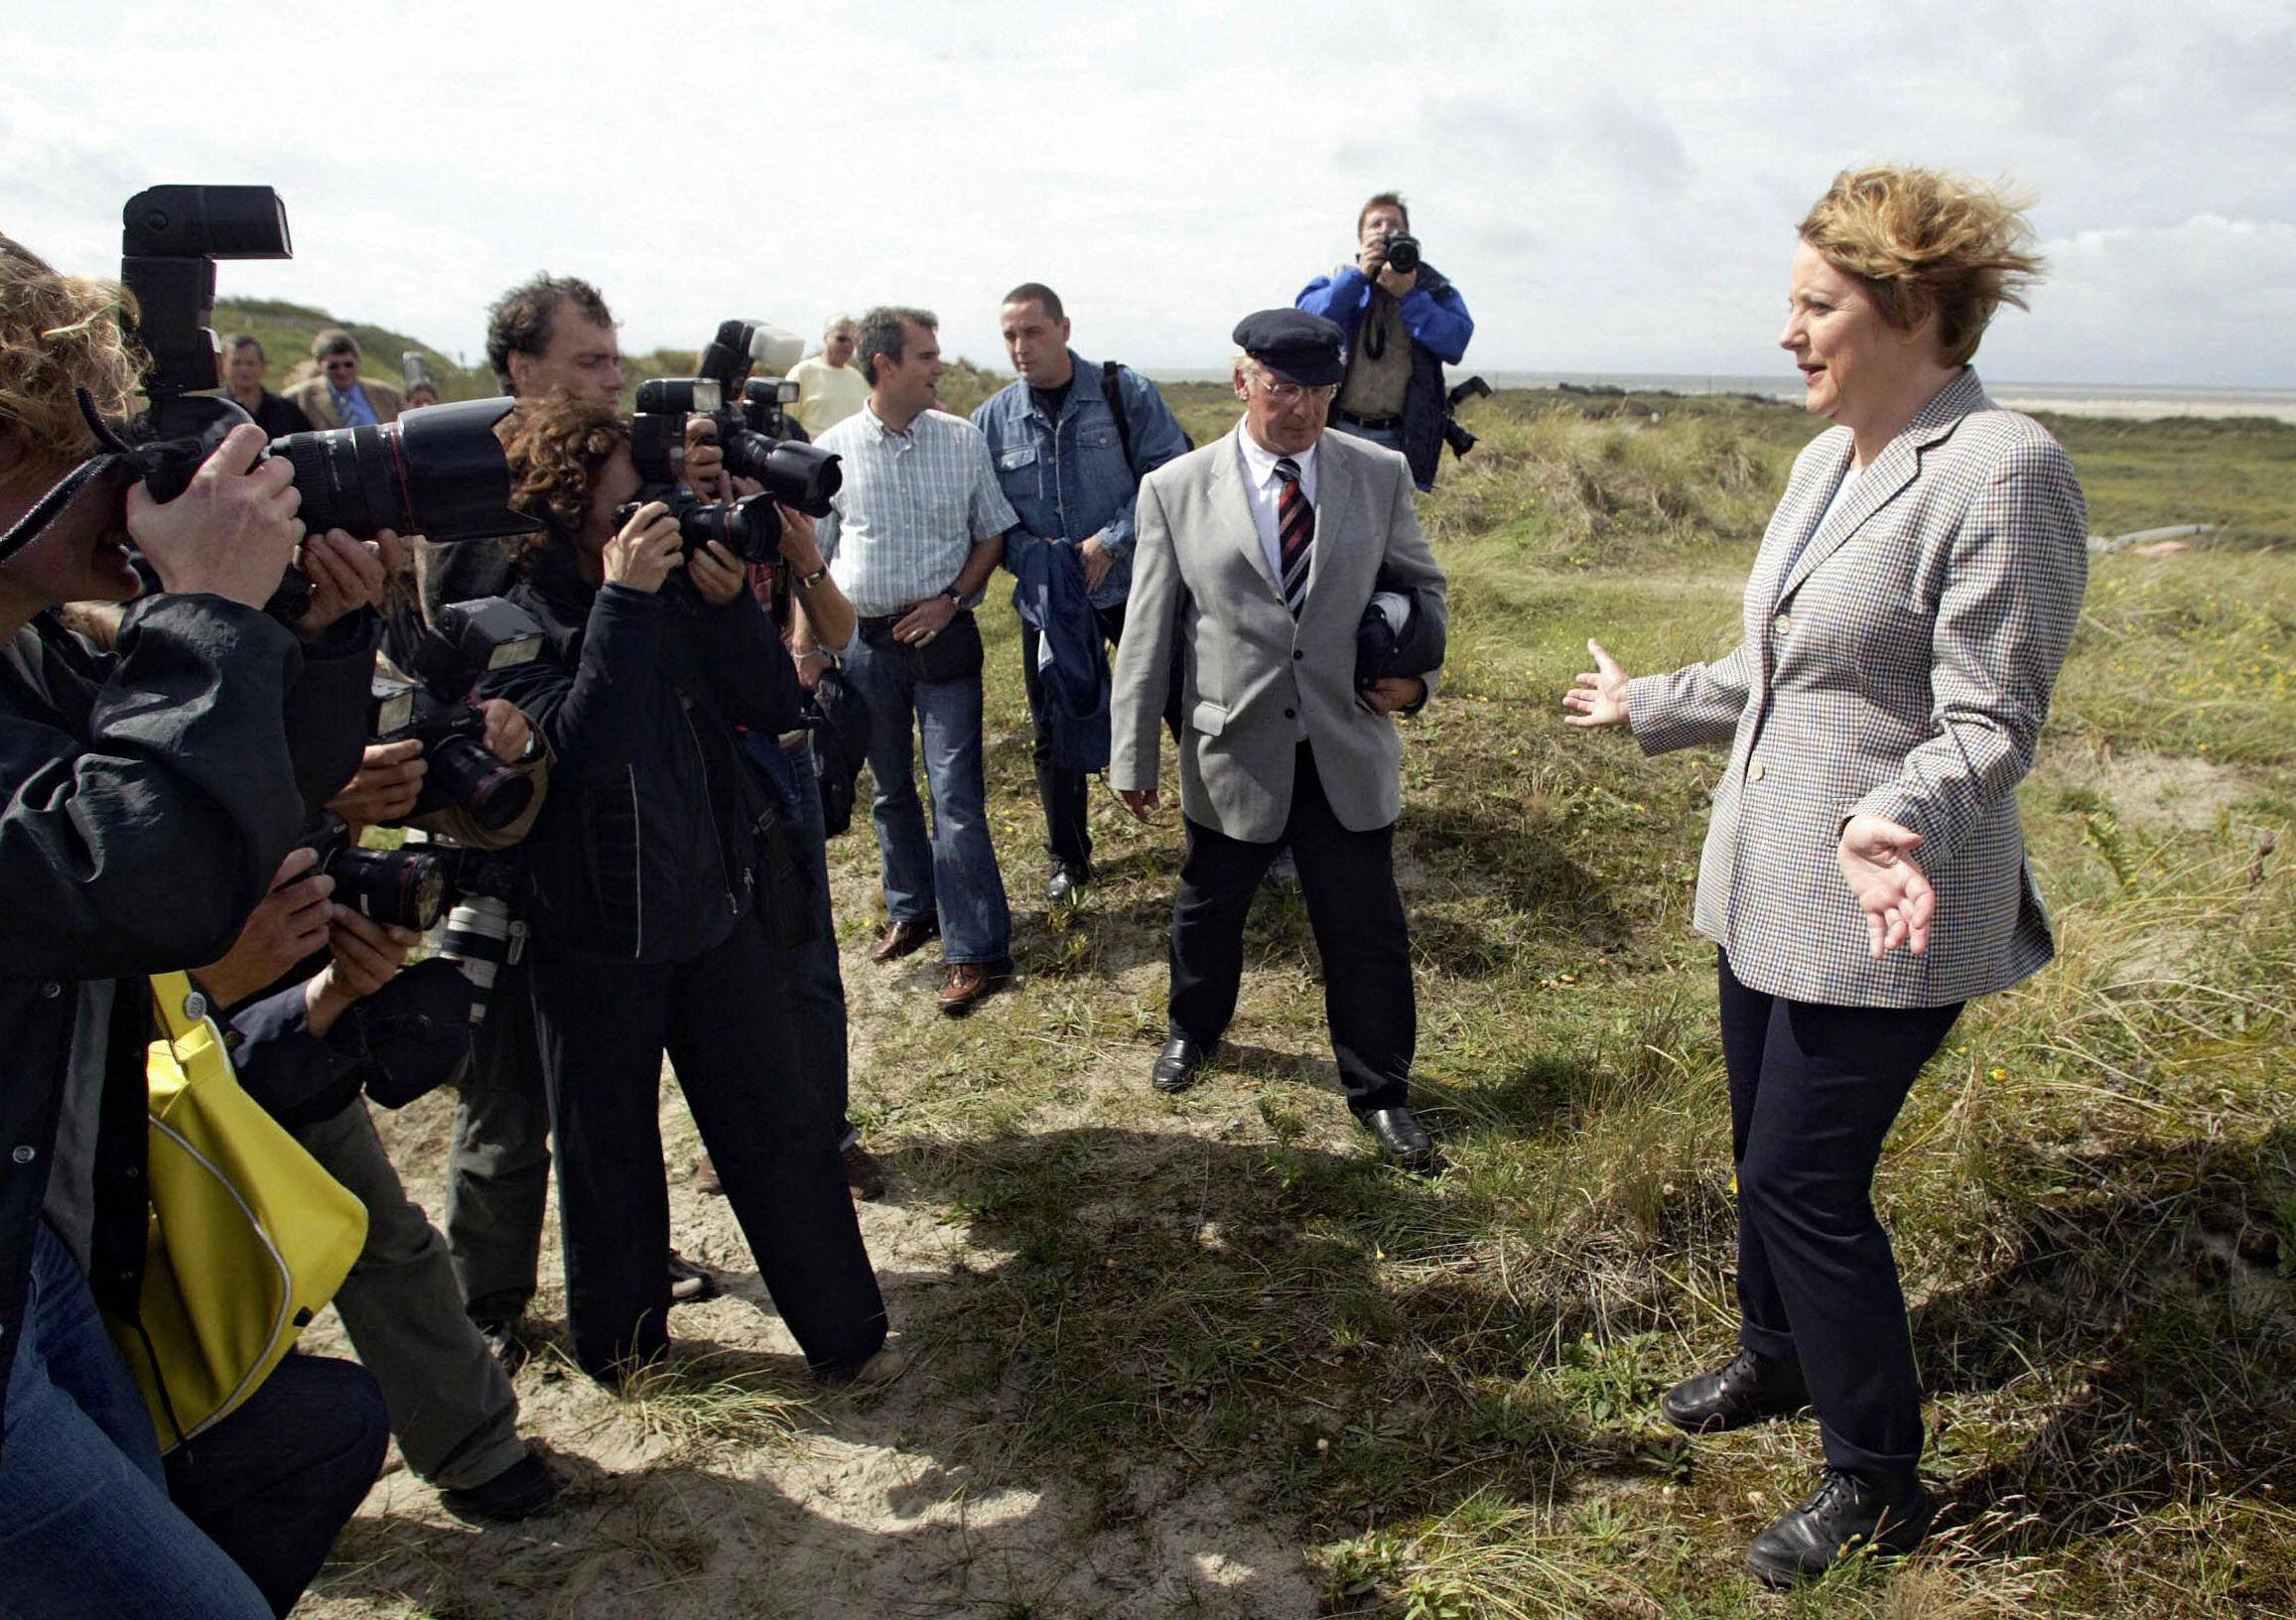 Angela Merkel stands on a dune as she poses for photographers during a visit to the North Sea island of Borkum, Germany, in 2004.